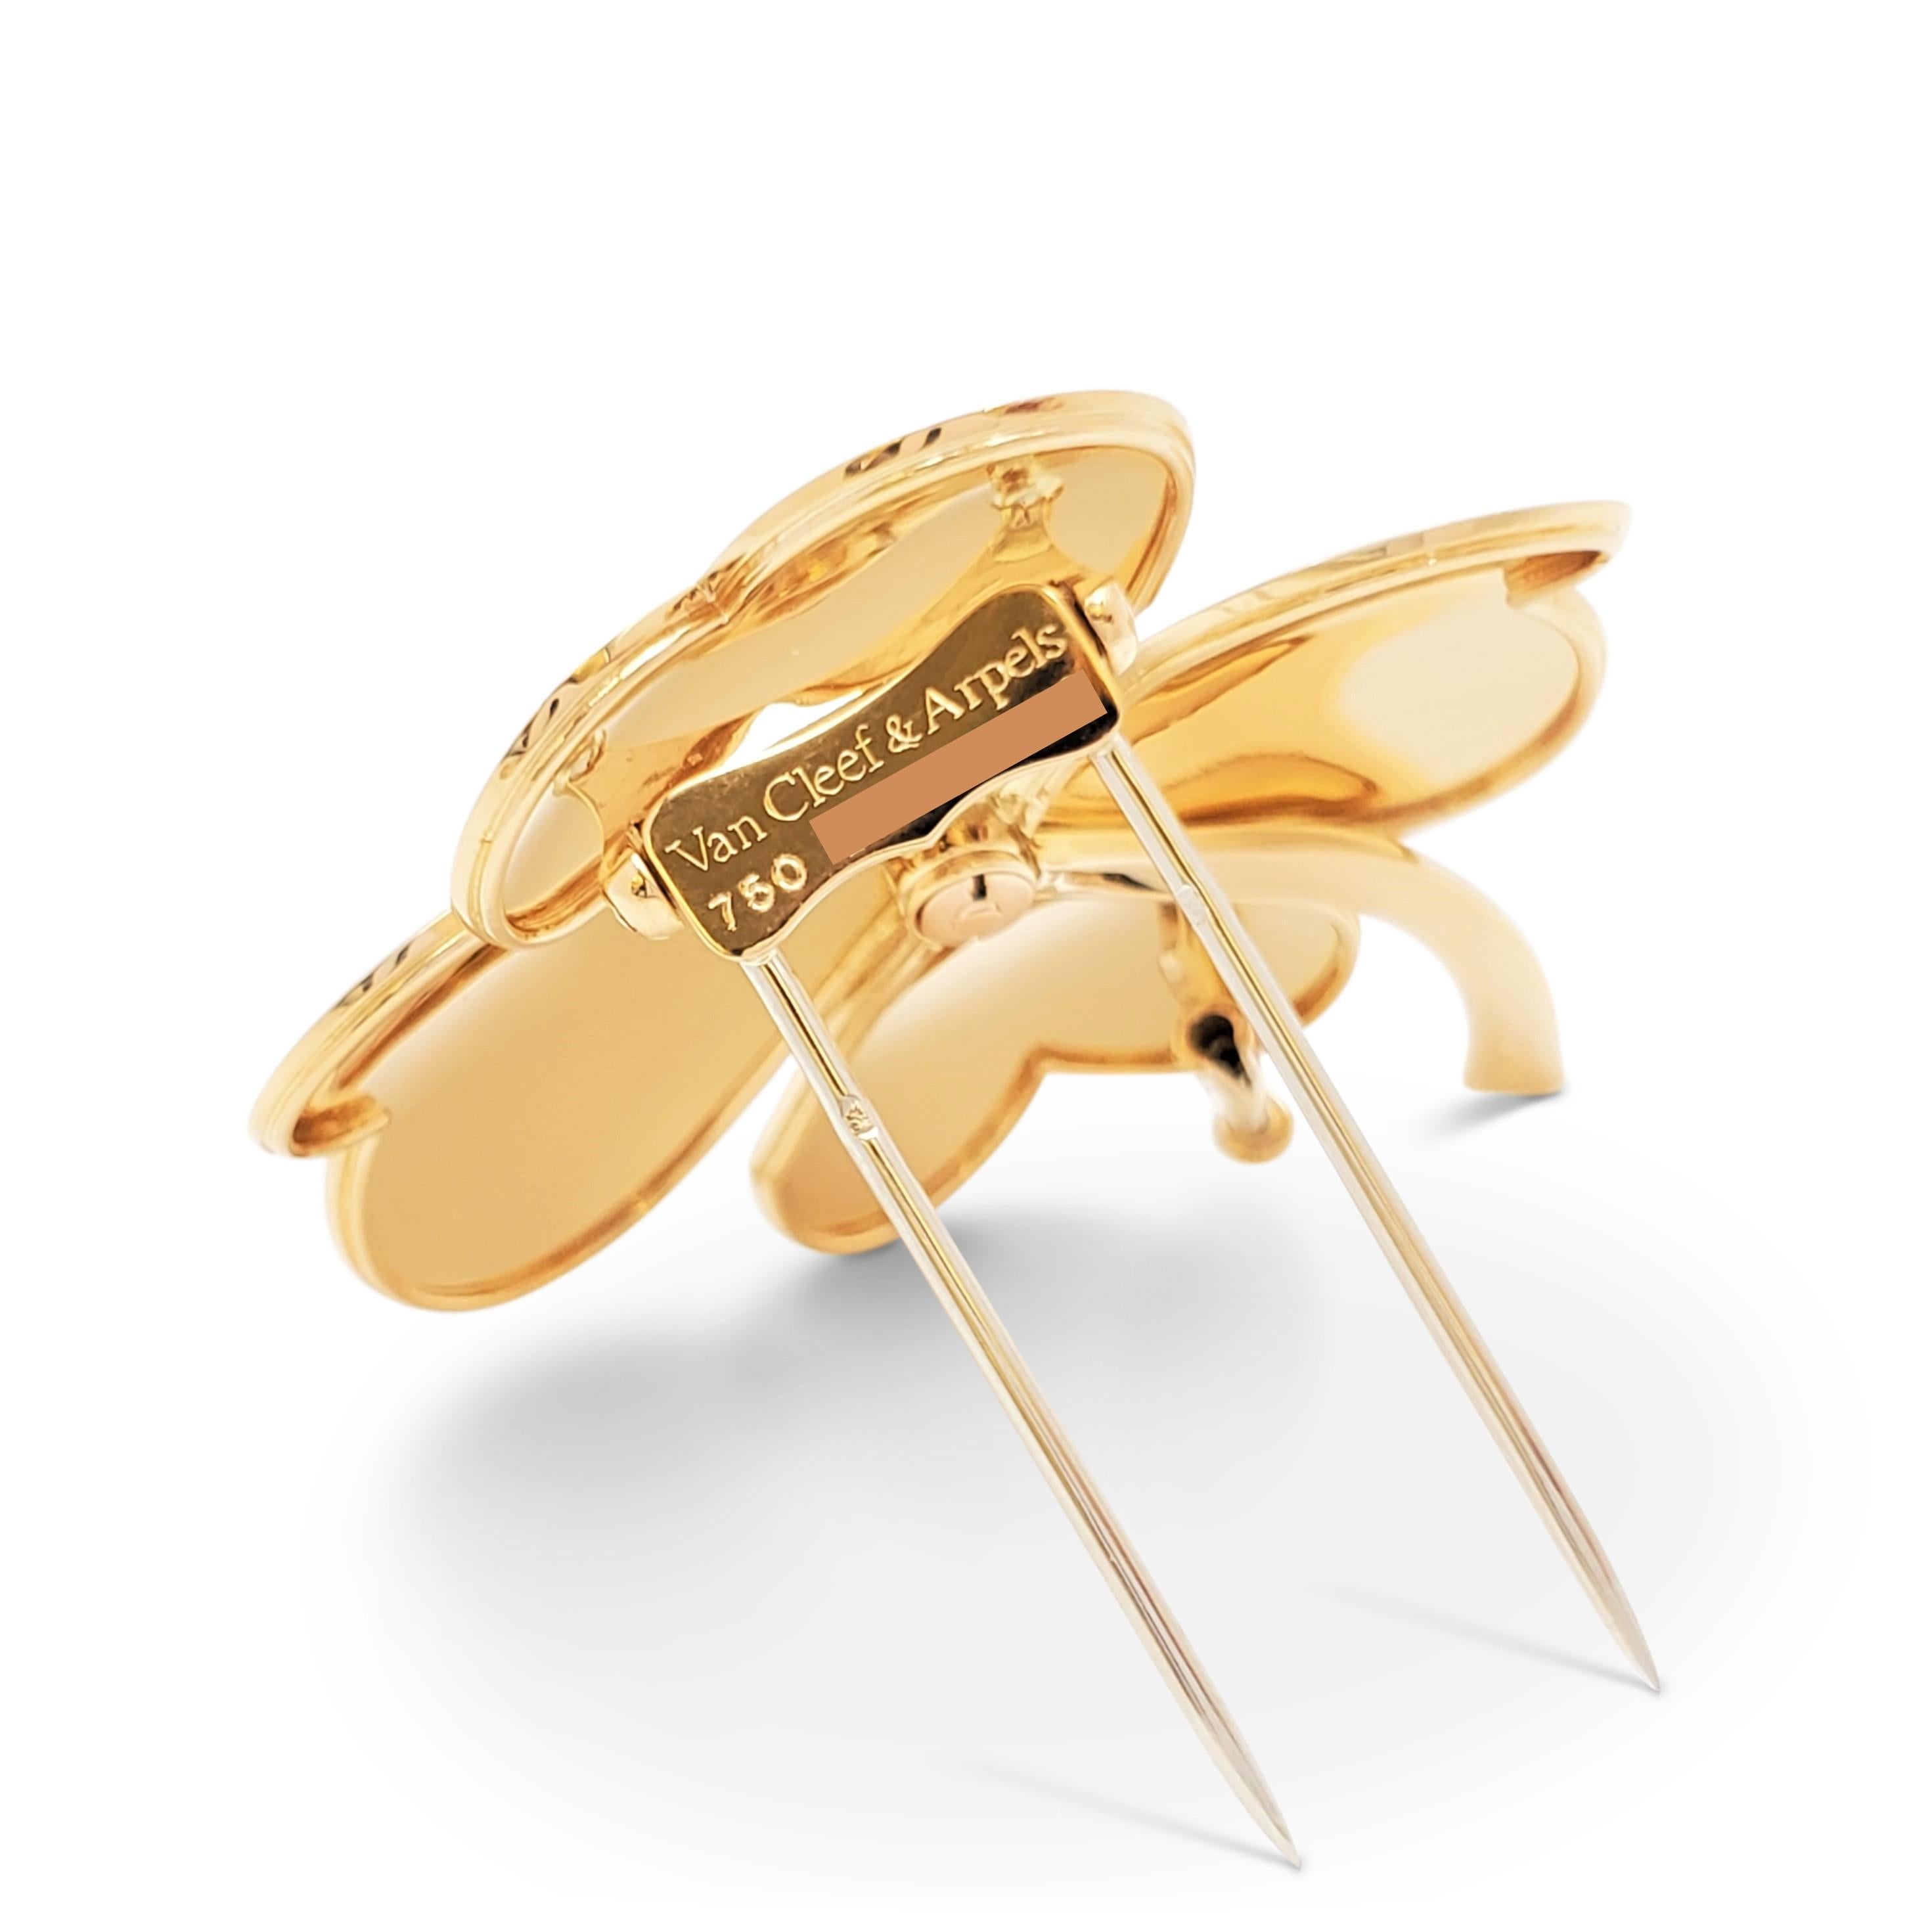 Van Cleef & Arpels 'Cosmos' Yellow Gold and Diamond Pin 2